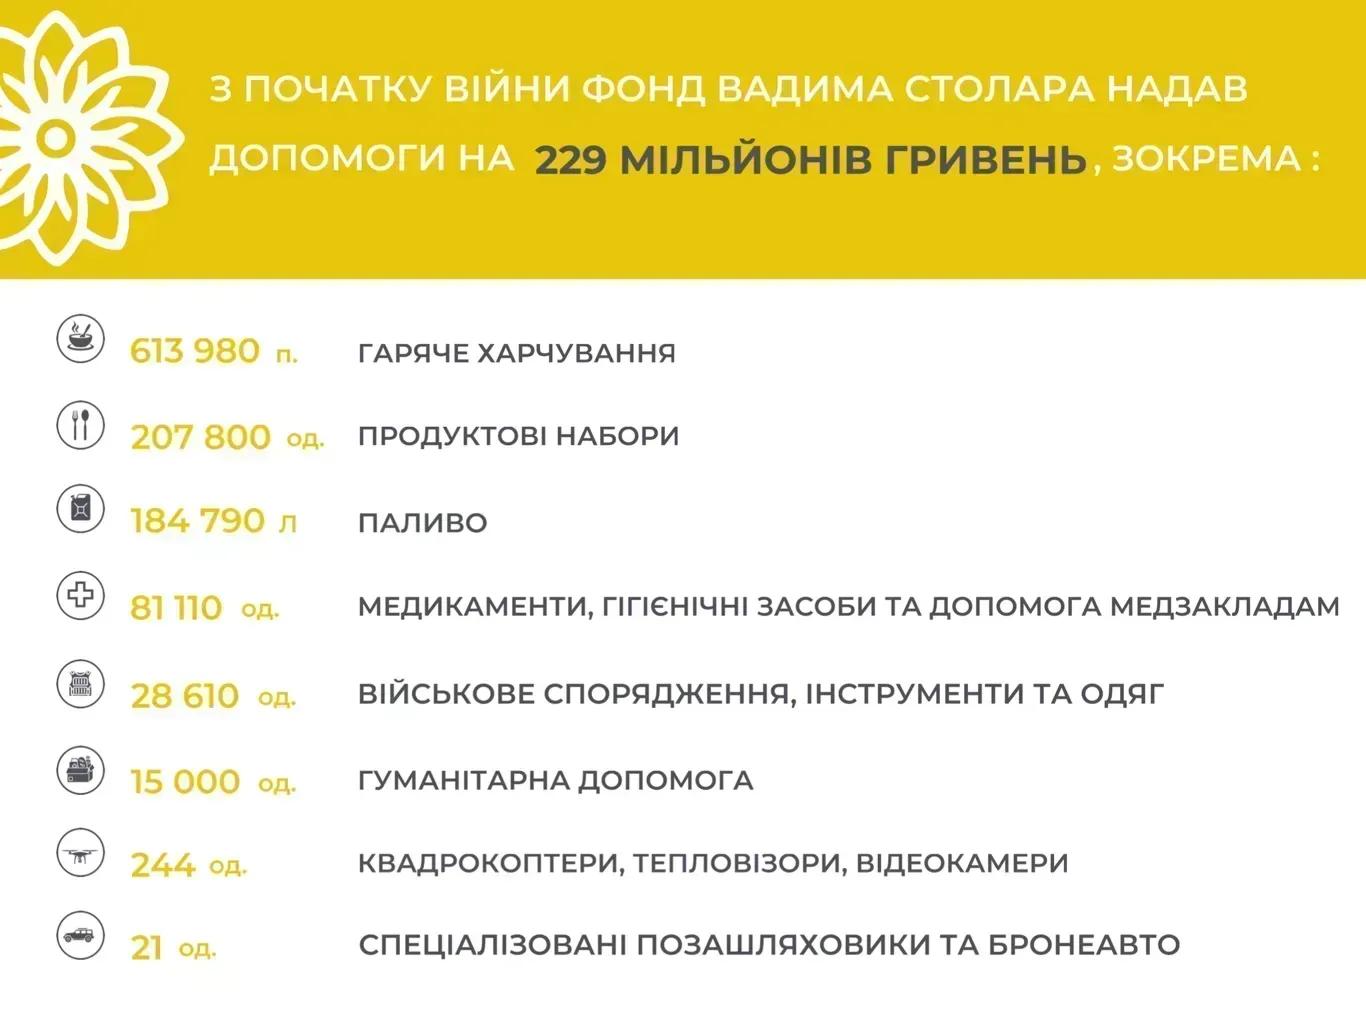 Results-2022: during the year, charitable projects of the Vadym Stolar Foundation reached more than 1 million Ukrainians